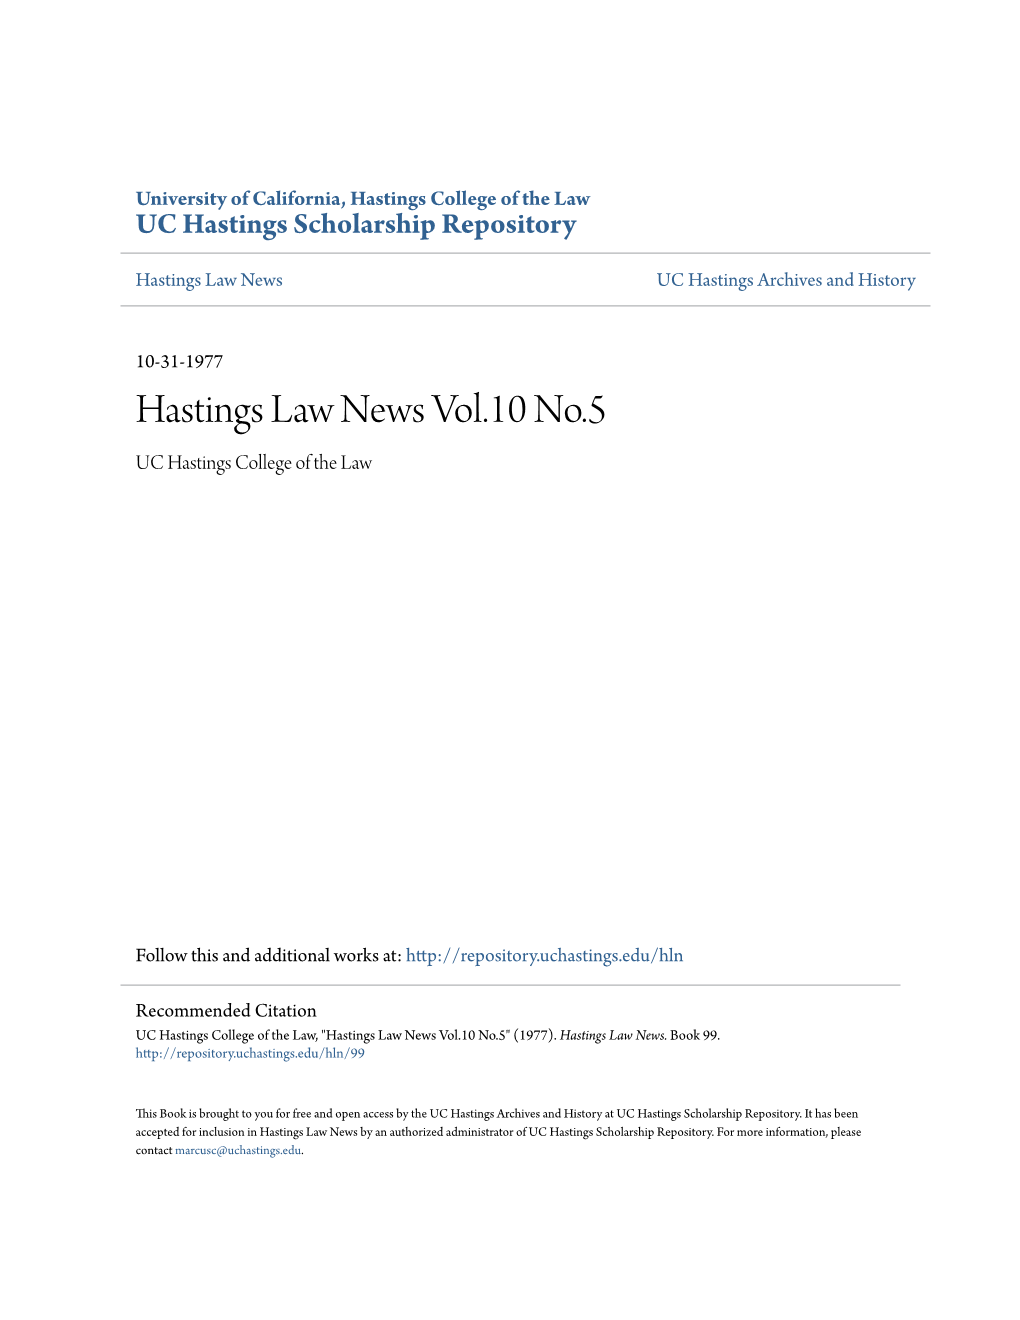 Hastings Law News Vol.10 No.5 UC Hastings College of the Law